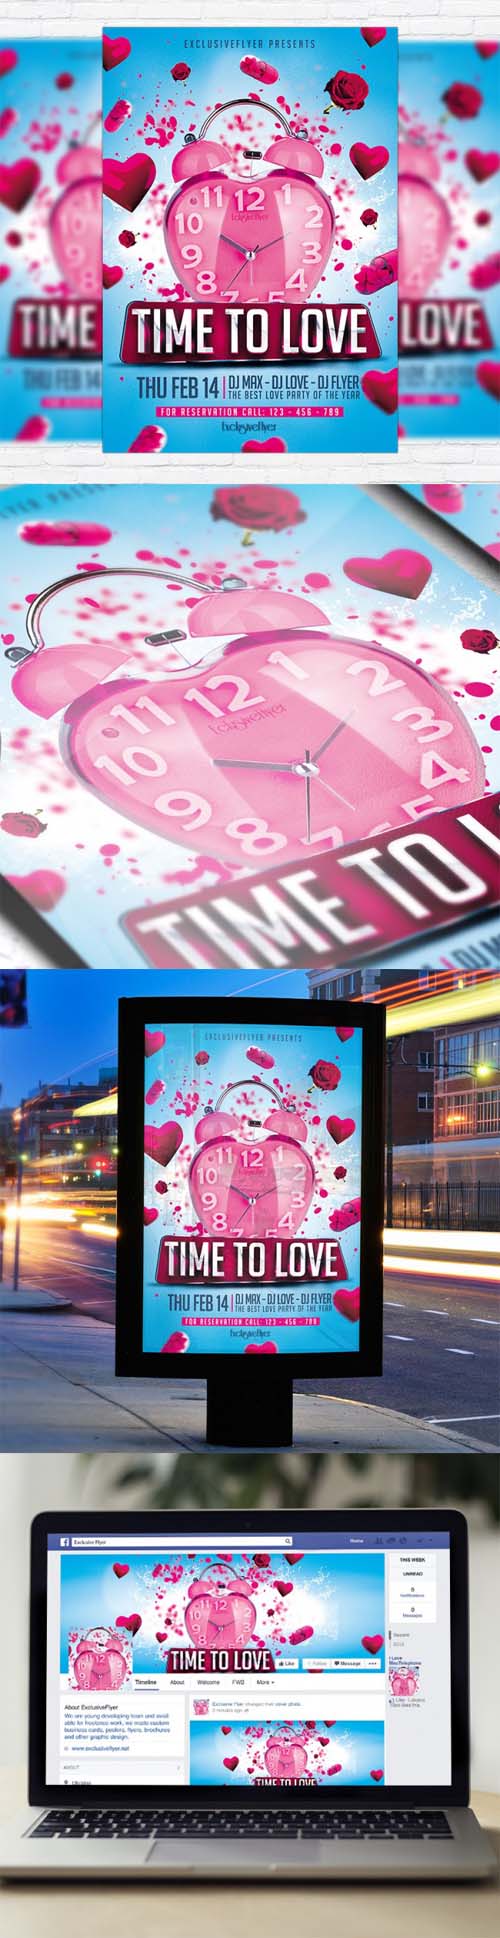 Flyer Template - Time to Love + Facebook Cover